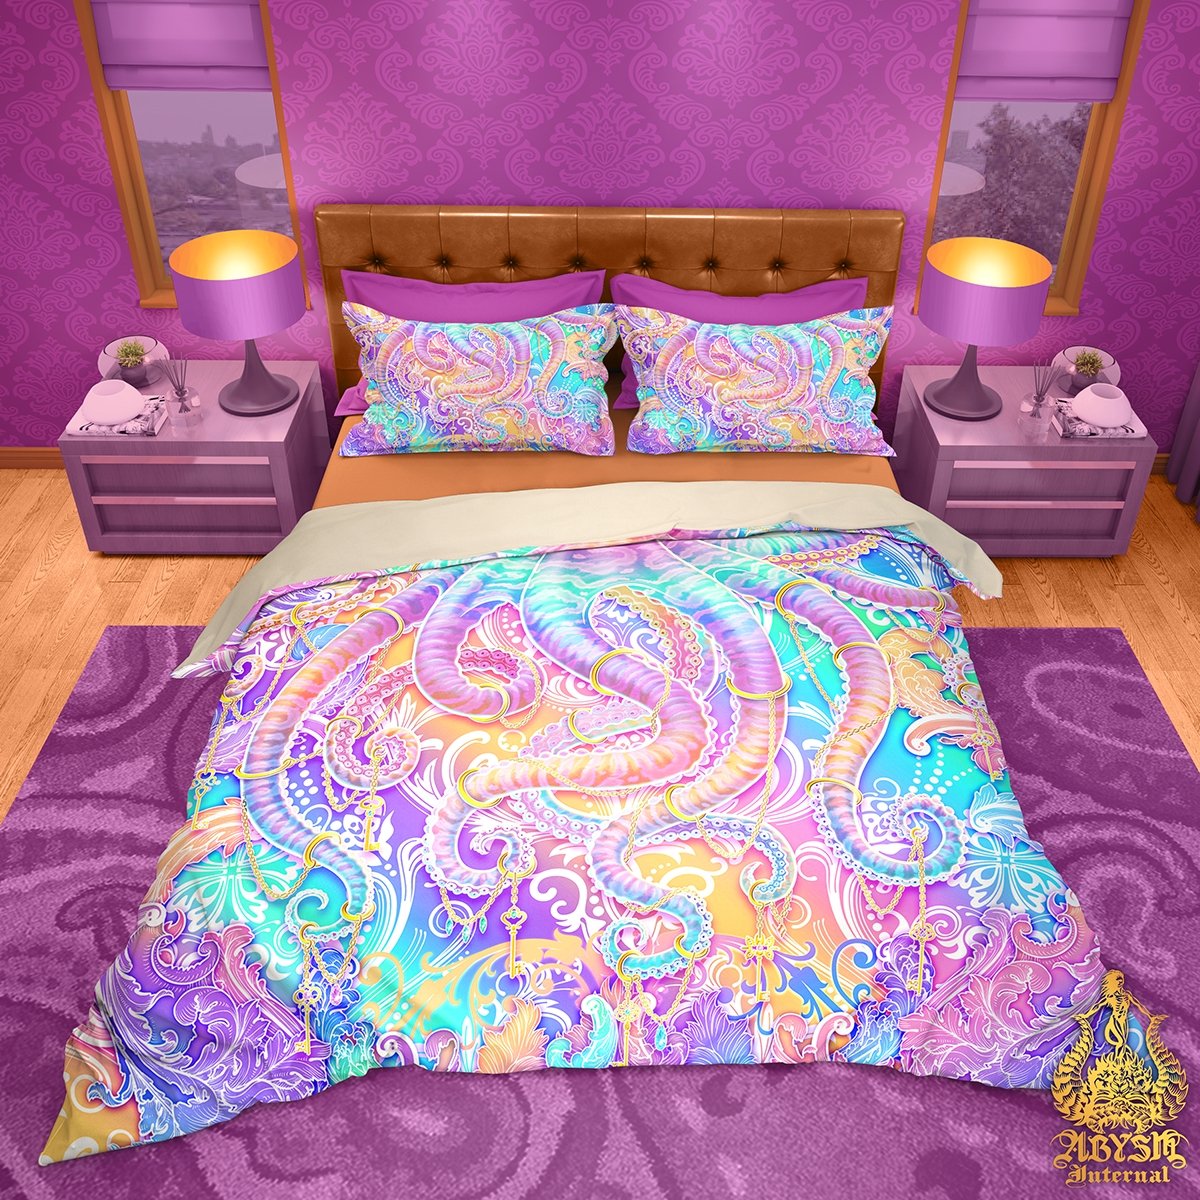 Pastel Bedding Set, Comforter and Duvet, Aesthetic Bed Cover, Kawaii Gamer Bedroom Decor, King, Queen and Twin Size - Kawaii Octopus, Fairy Kei - Abysm Internal